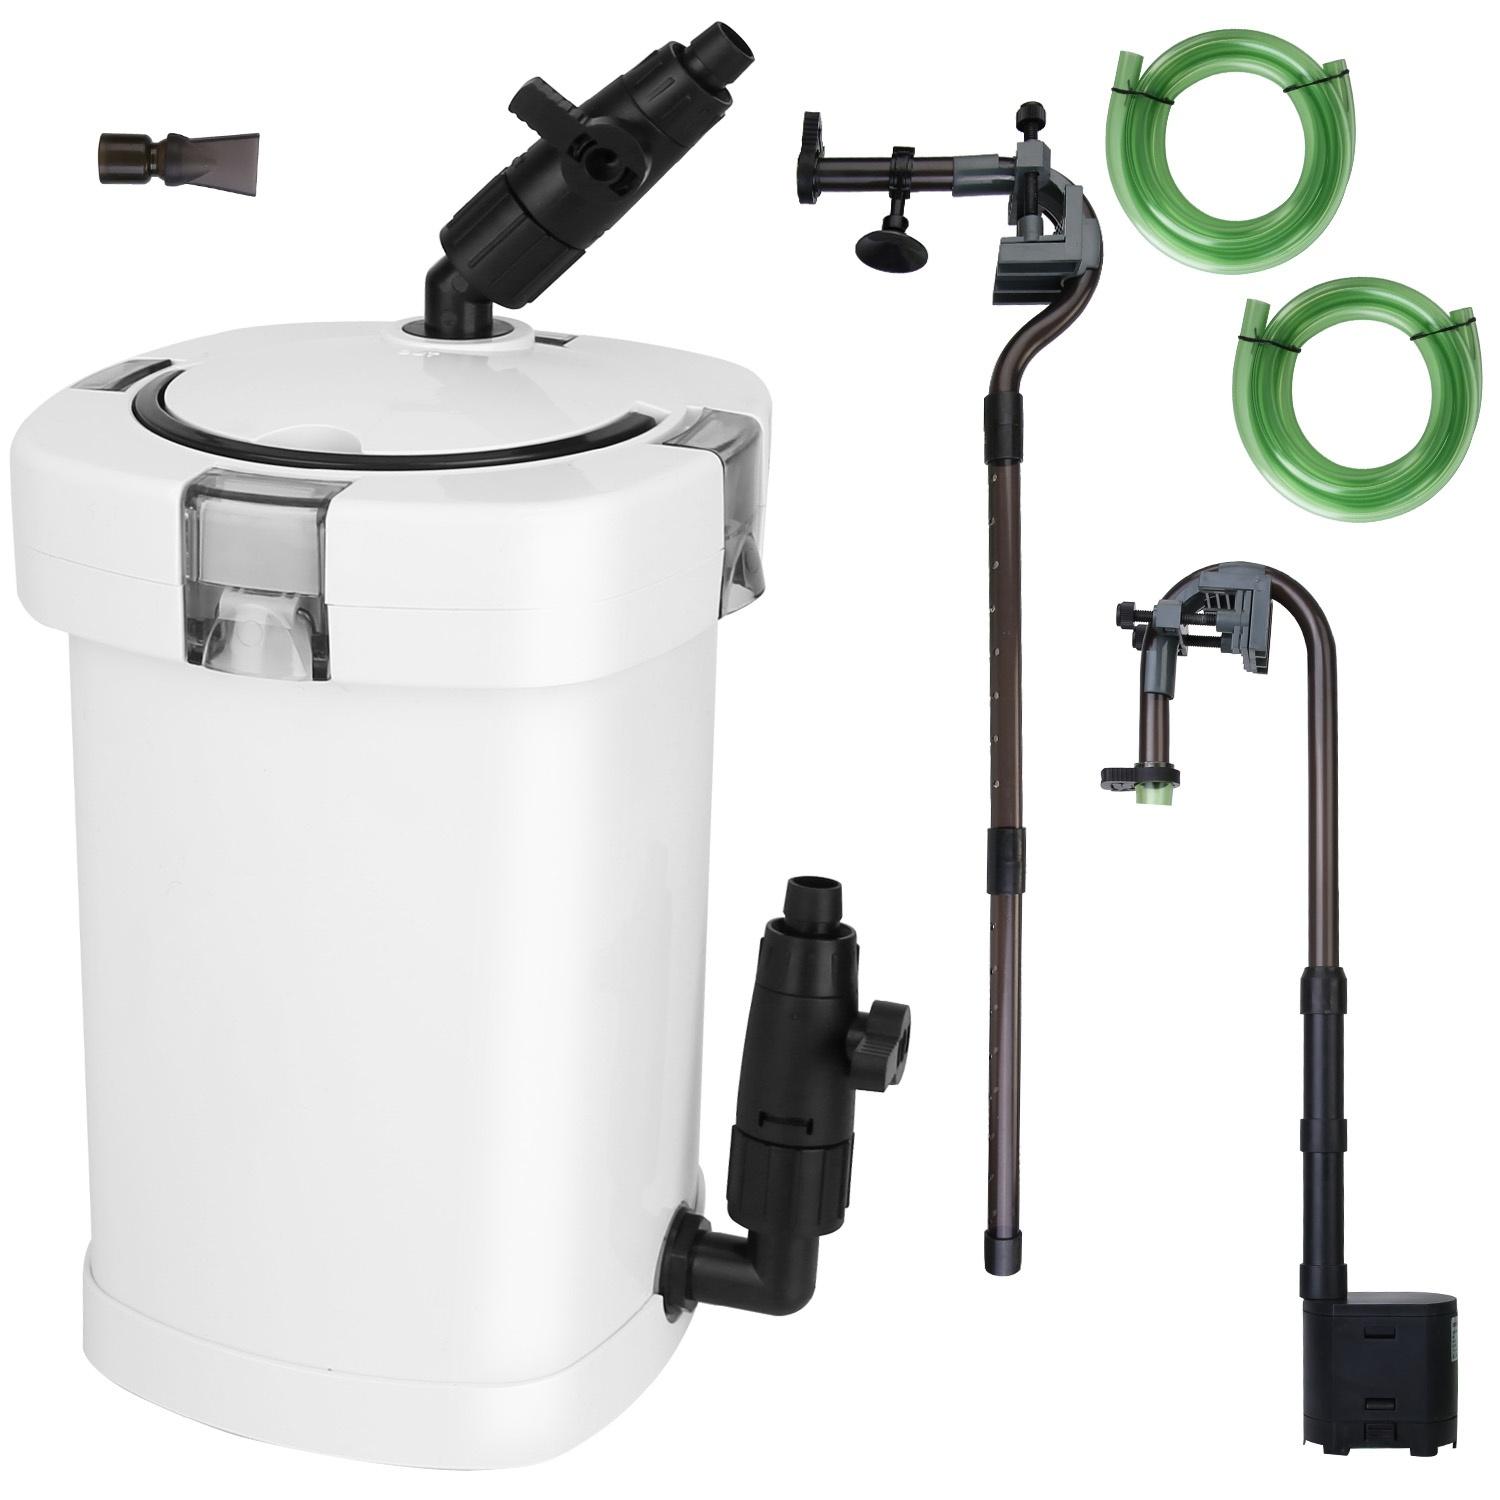 Aquarium filter system with hoses and accessories